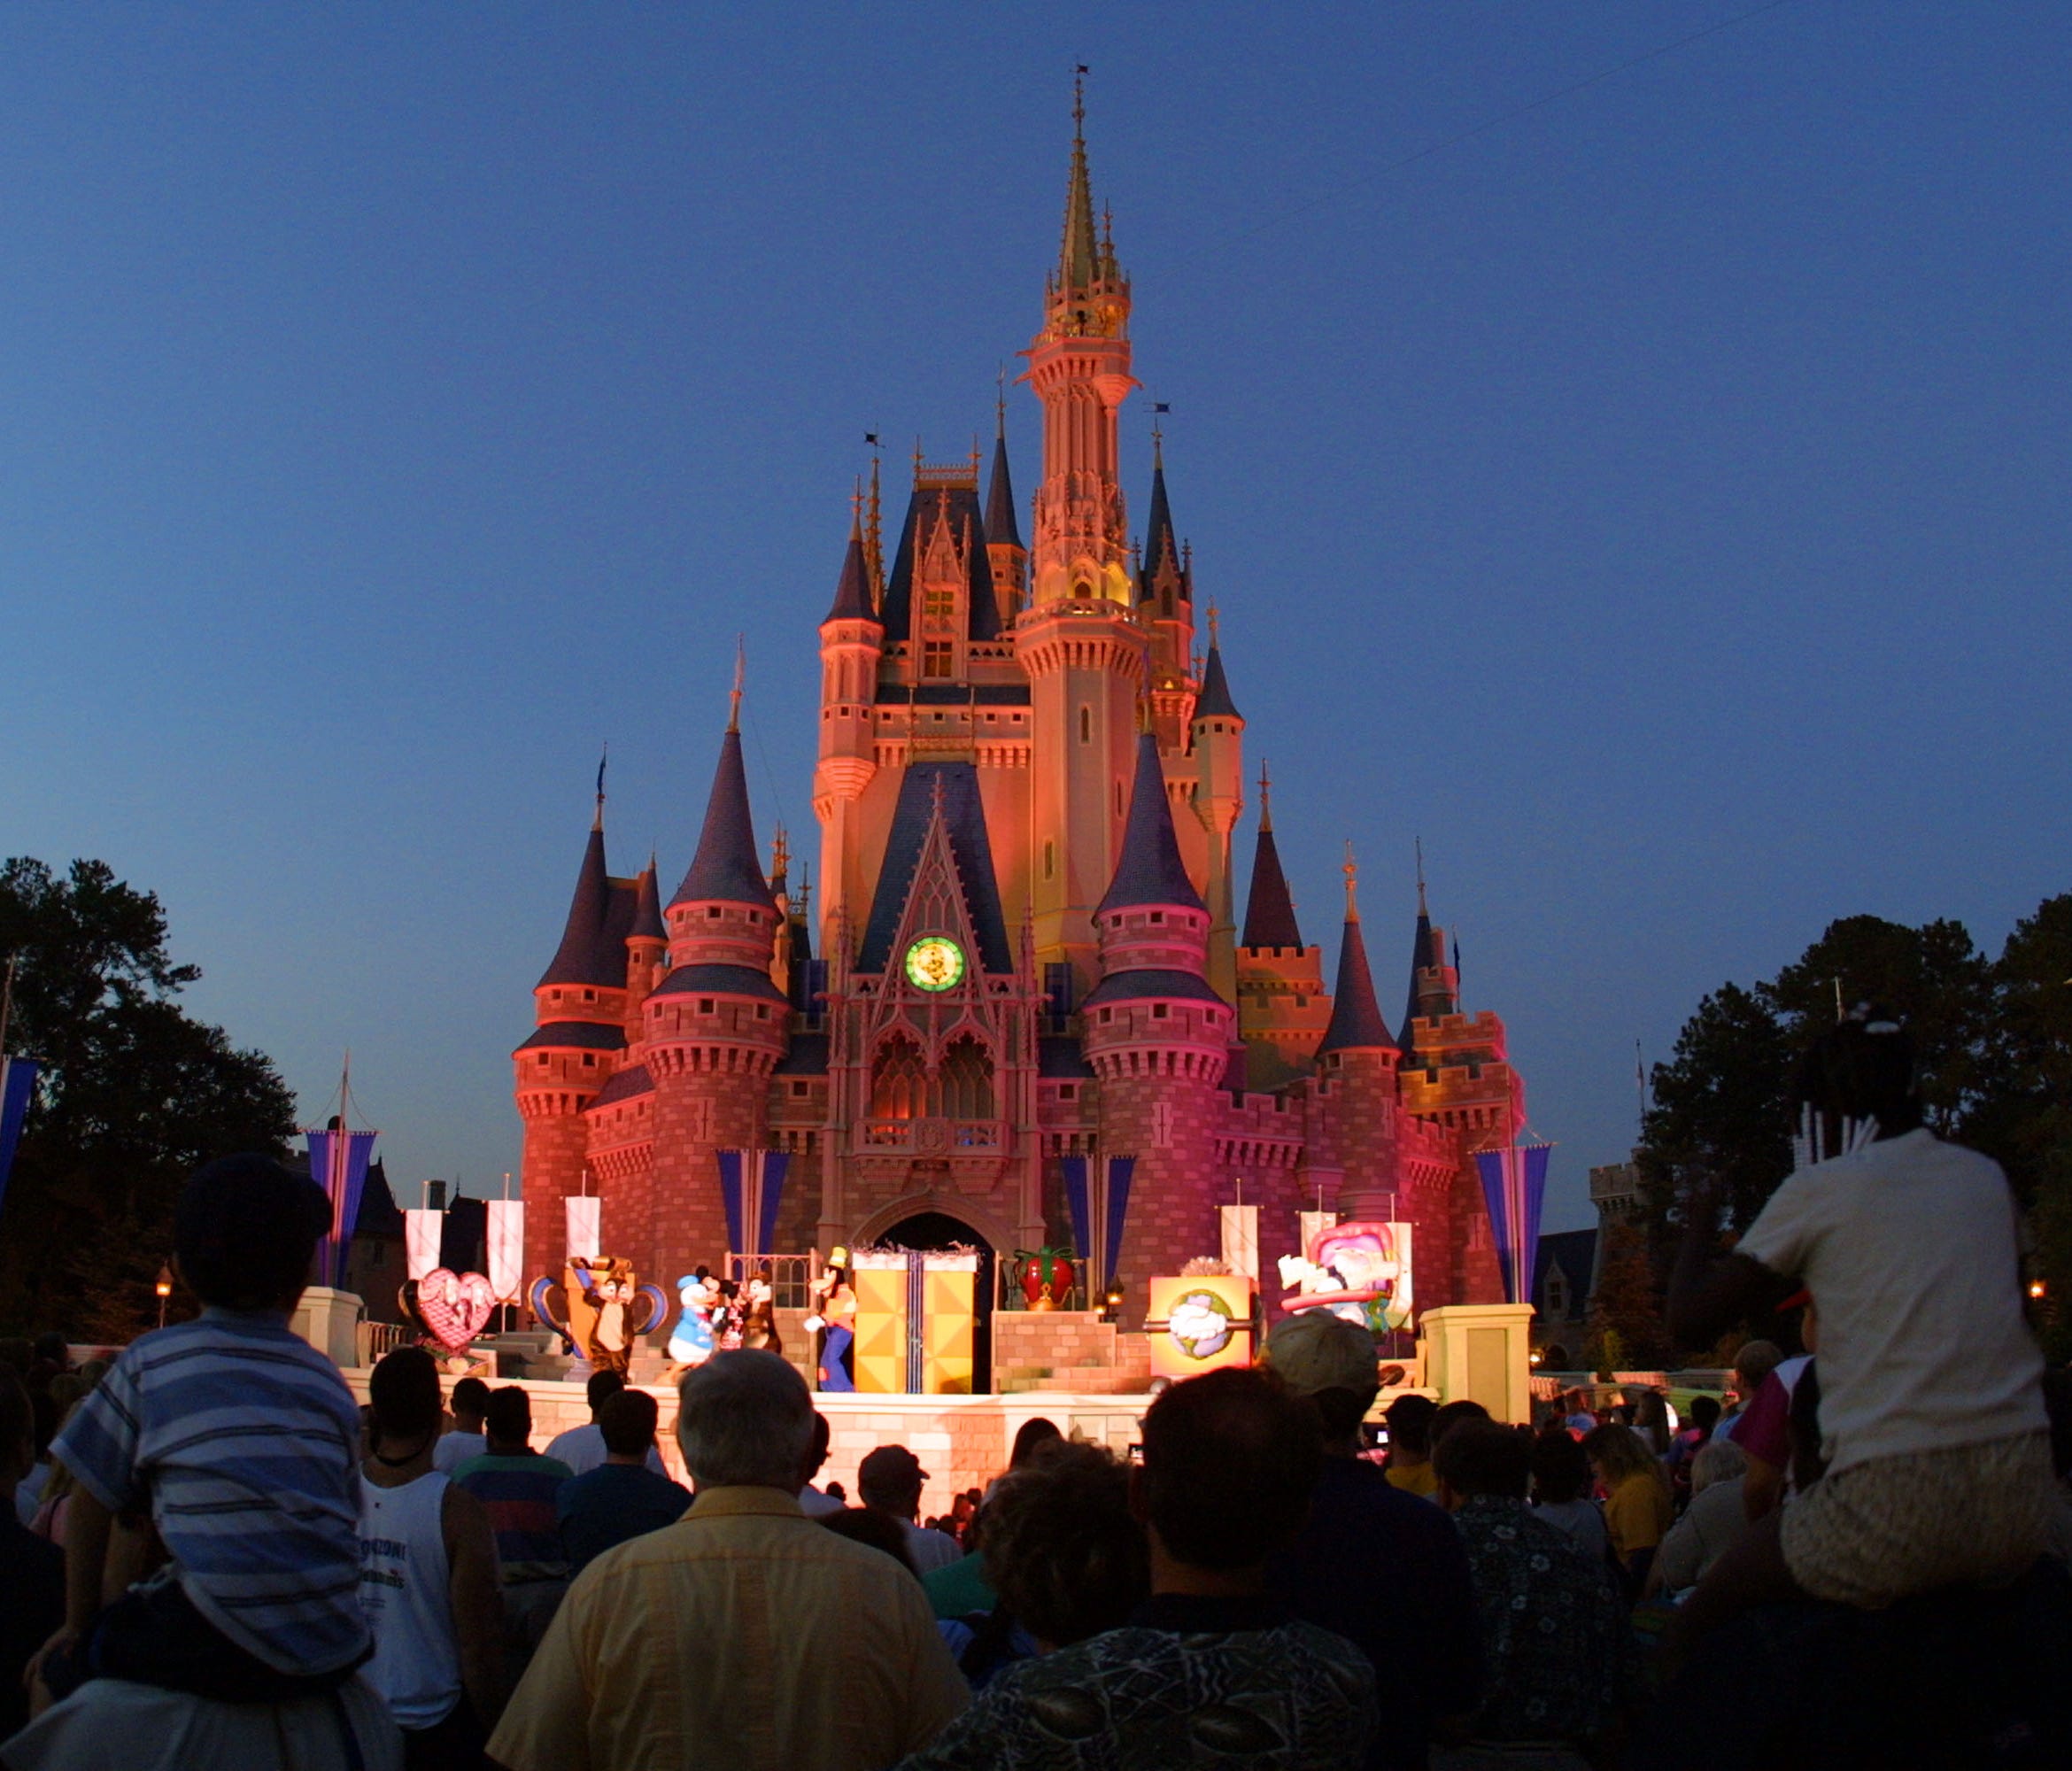 Orlando is the third most booked domestic destination on Expedia in 2017. People watch a show on stage in front of Cinderella's castle at Walt Disney World's Magic Kingdom